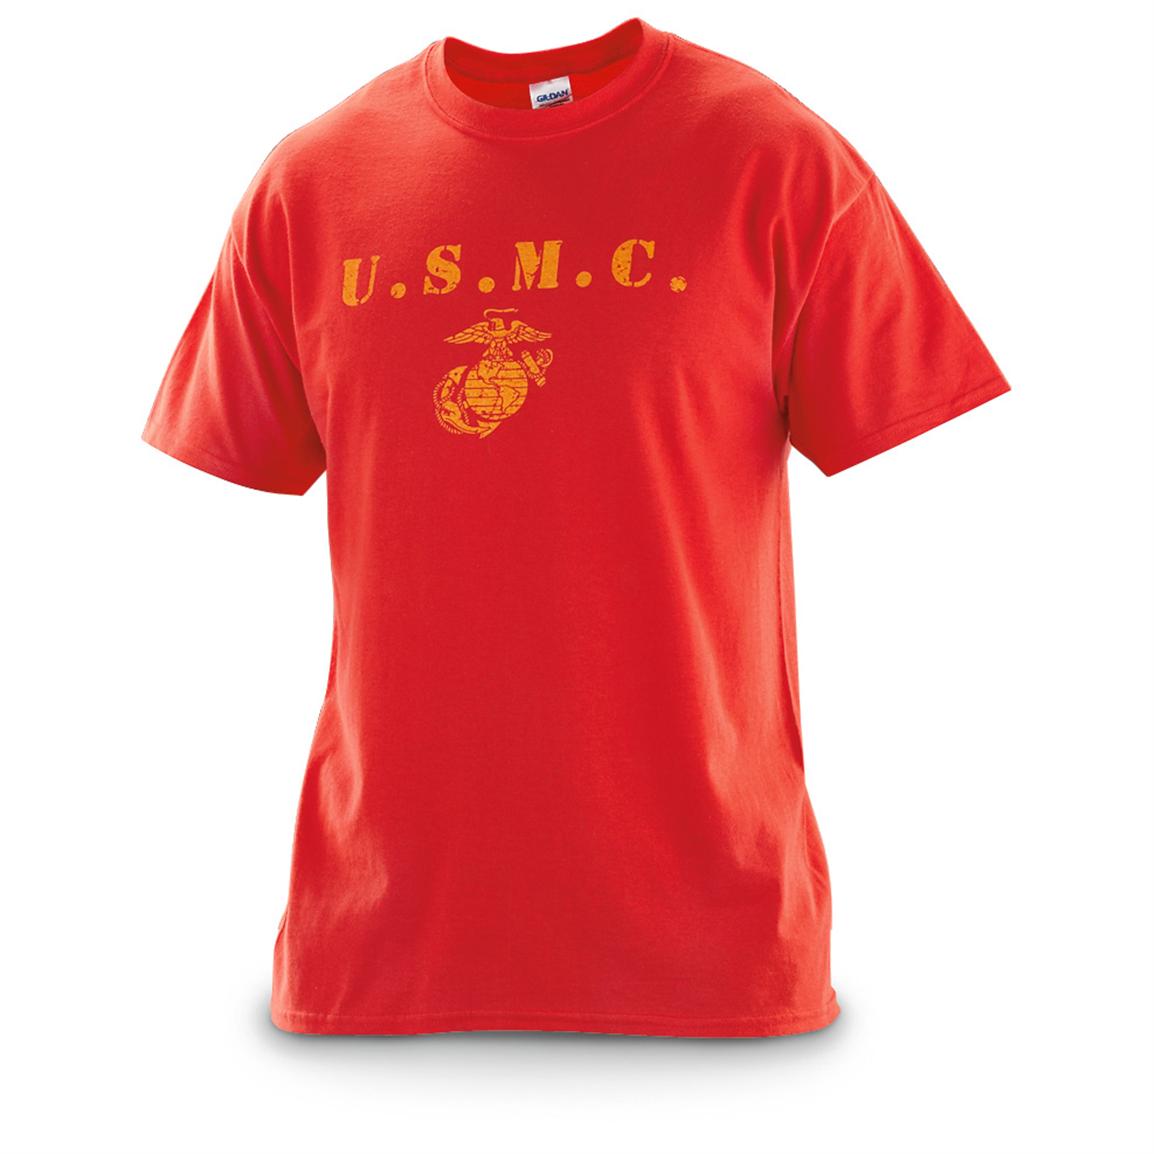 U.S. Marine Corps. Distressed T-Shirt, Red - 578906, Tactical Clothing ...